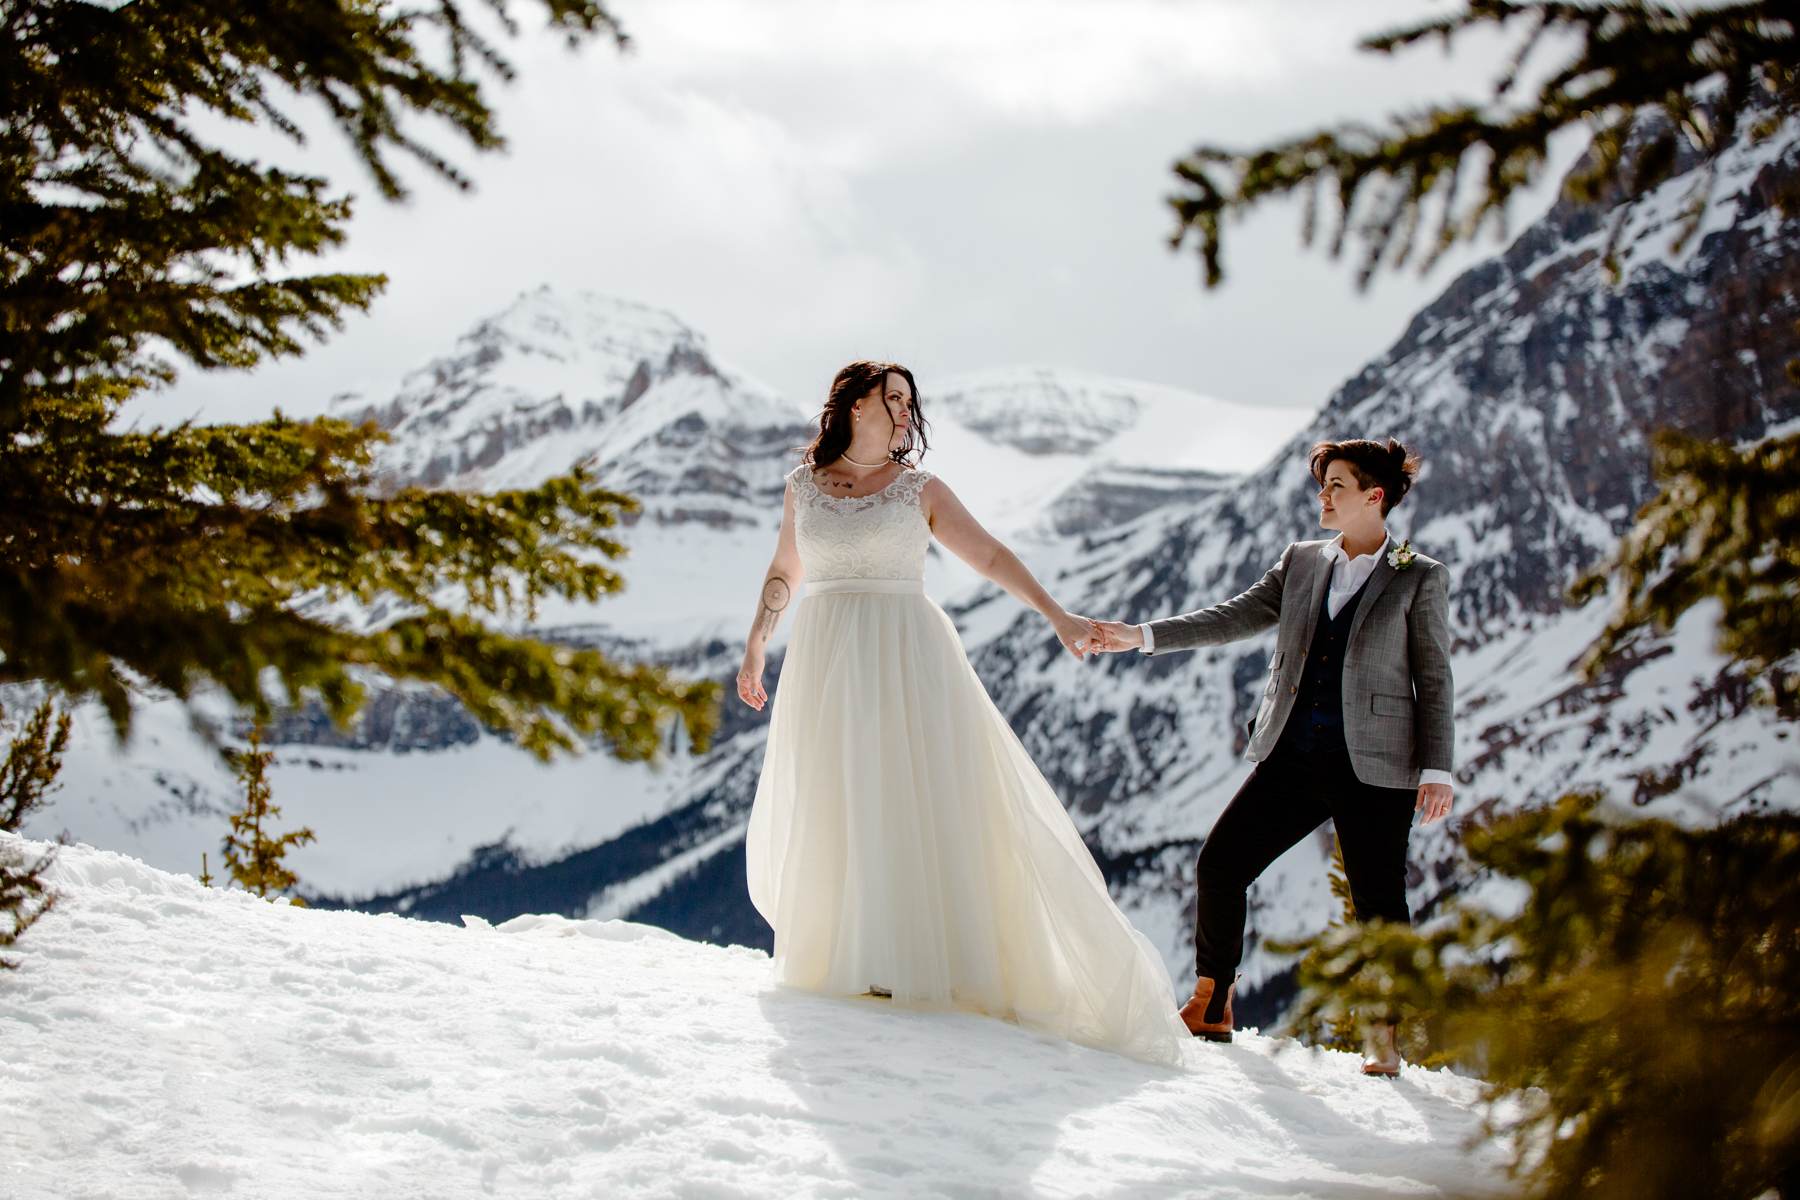 Banff National Park Elopement Photography with LGBTQ-friendly photographers - Image 15